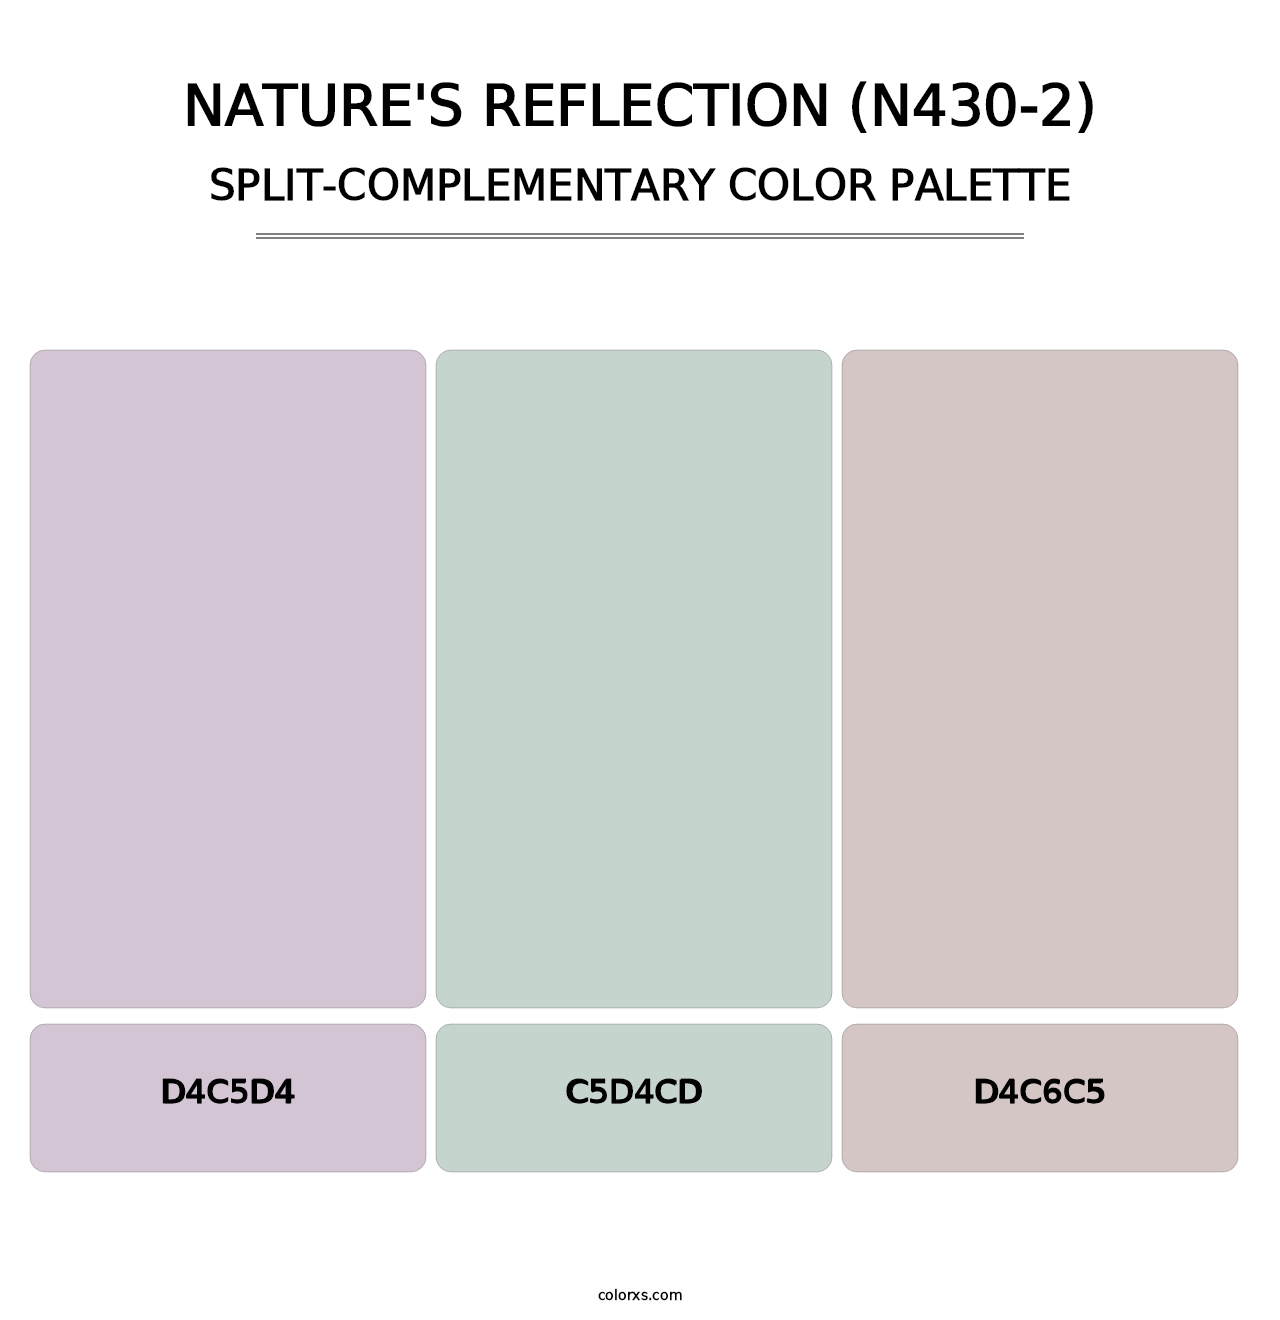 Nature'S Reflection (N430-2) - Split-Complementary Color Palette